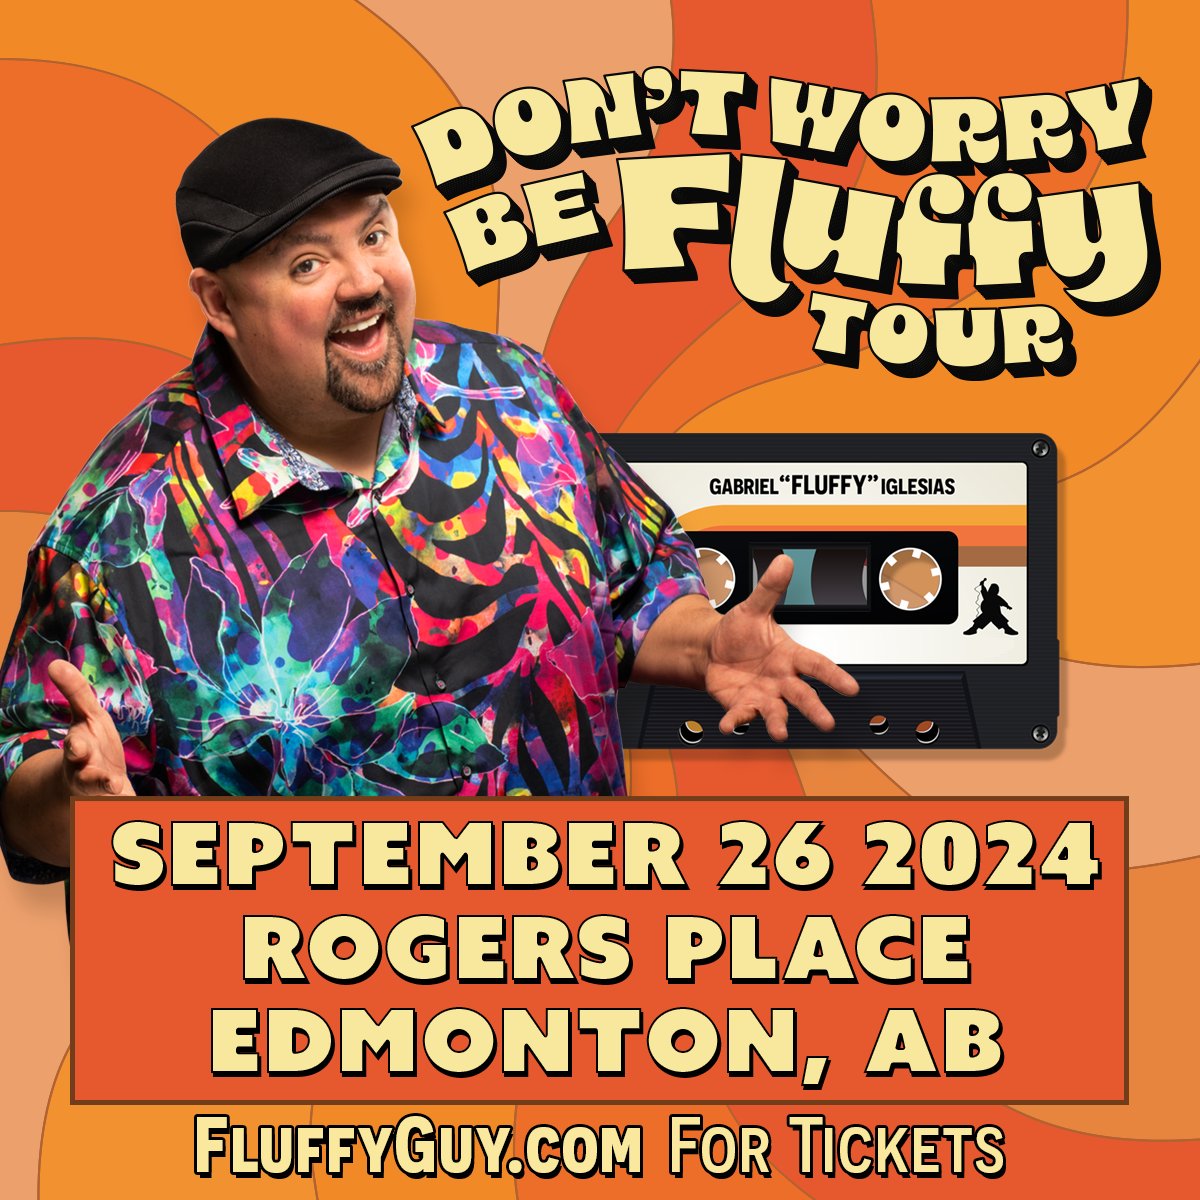 ☁️ EVENT ANNOUNCEMENT!! ☁️ Comedian @FluffyGuy is bringing his Don't Worry Be Fluffy Tour to #RogersPlace on September 26! Tickets on sale Thursday at 12PM. More info: RogersPlace.com/GabrielIglesias